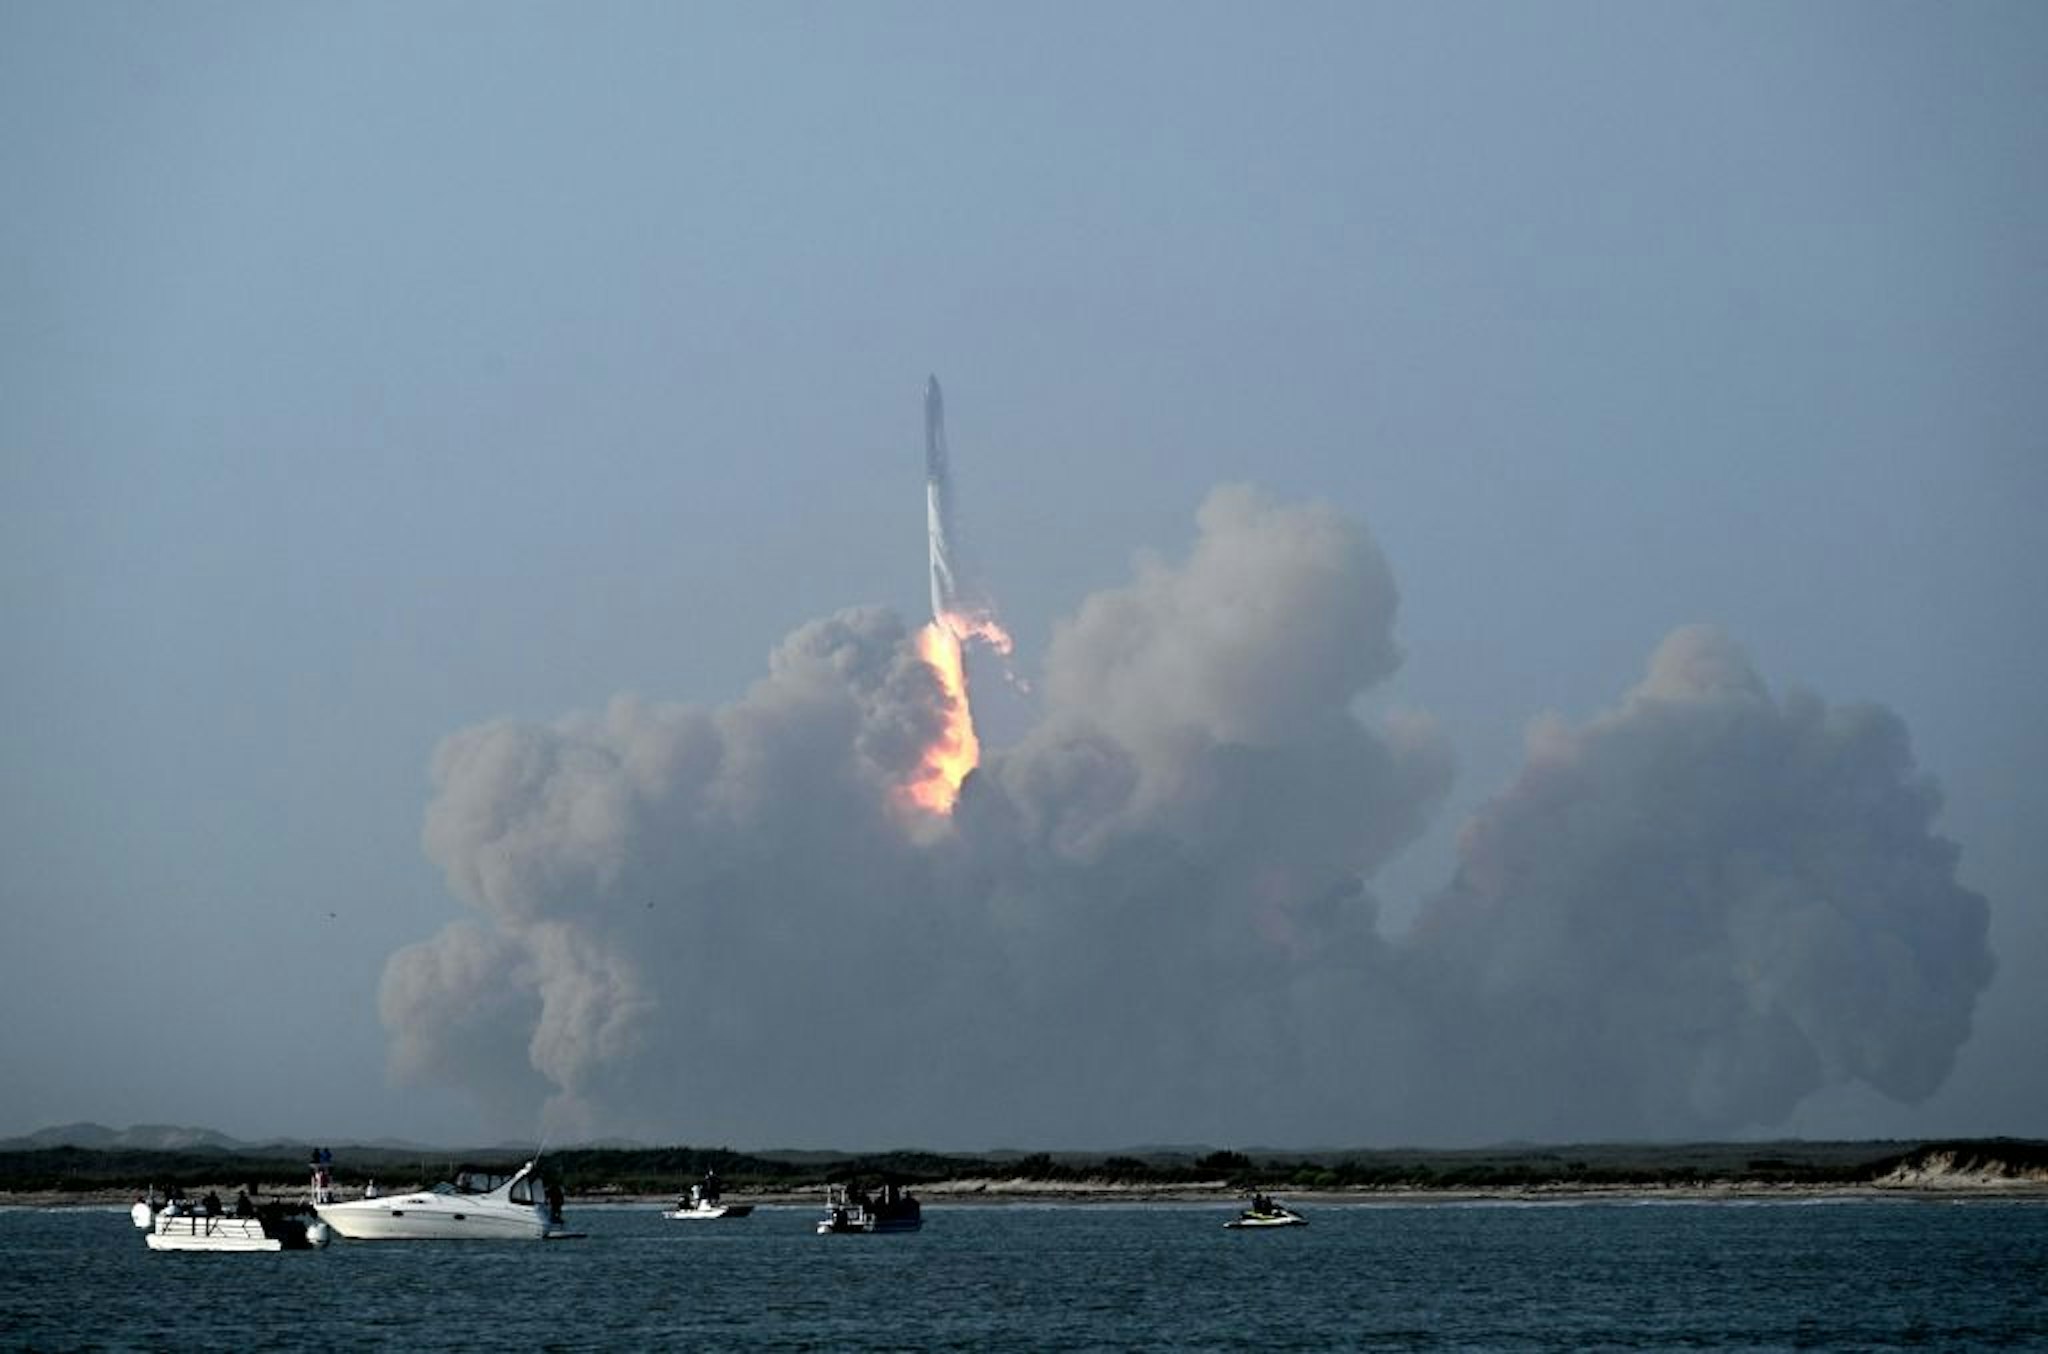 The SpaceX Starship lifts off from the launchpad during a flight test from Starbase in Boca Chica, Texas, on April 20, 2023. - The rocket successfully blasted off at 8:33 am Central Time (1333 GMT). The Starship capsule had been scheduled to separate from the first-stage rocket booster three minutes into the flight but separation failed to occur and the rocket blew up. (Photo by Patrick T. Fallon / AFP via Getty Images)